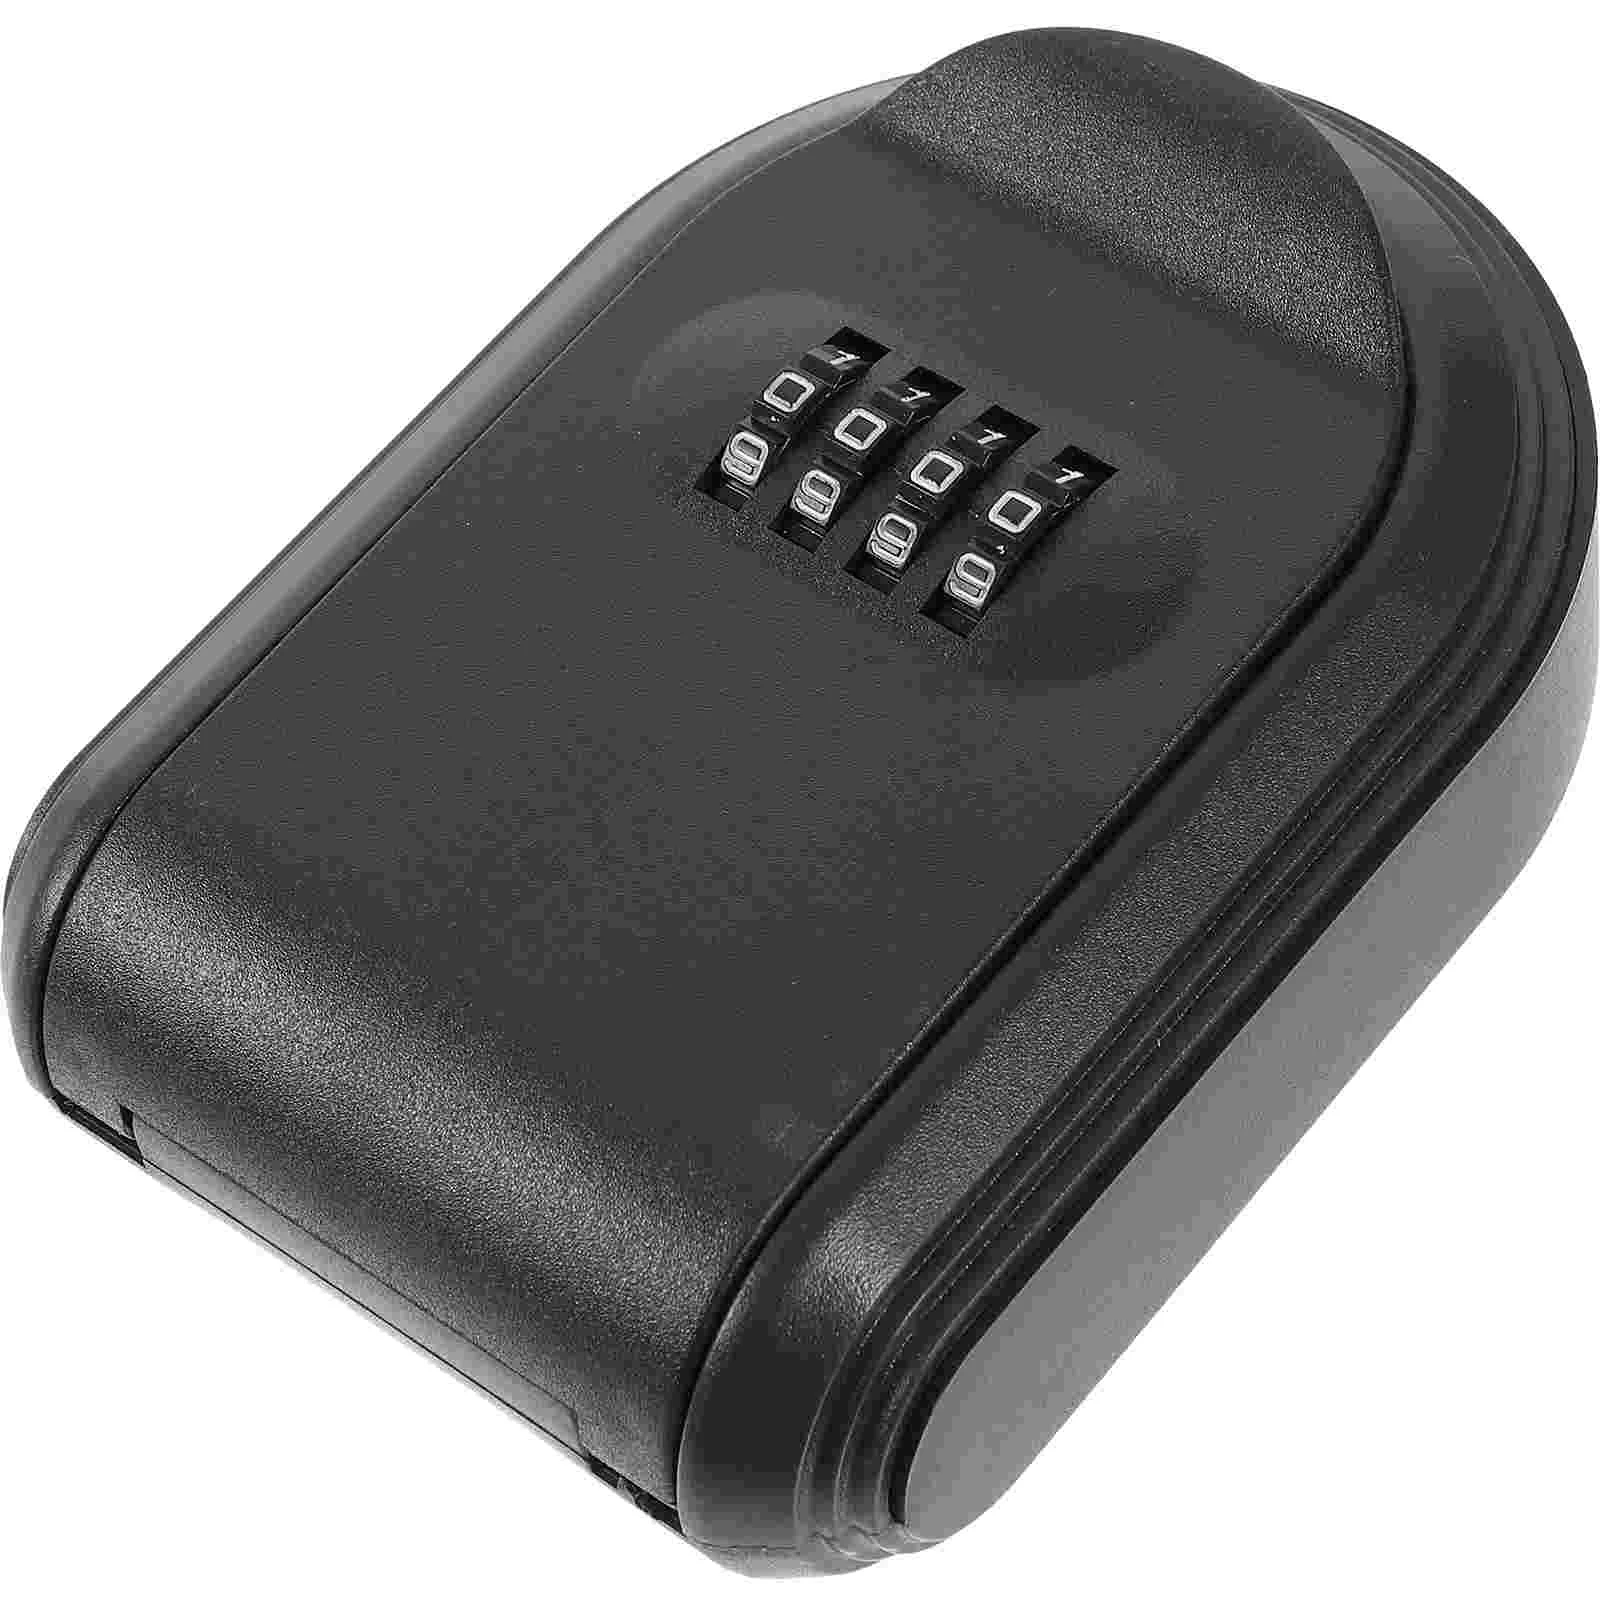 

Small Lockbox Key Password Door Wall Mounted Safe (Black) 1pc Hidden Holder for outside Hide Hider Security Boxes